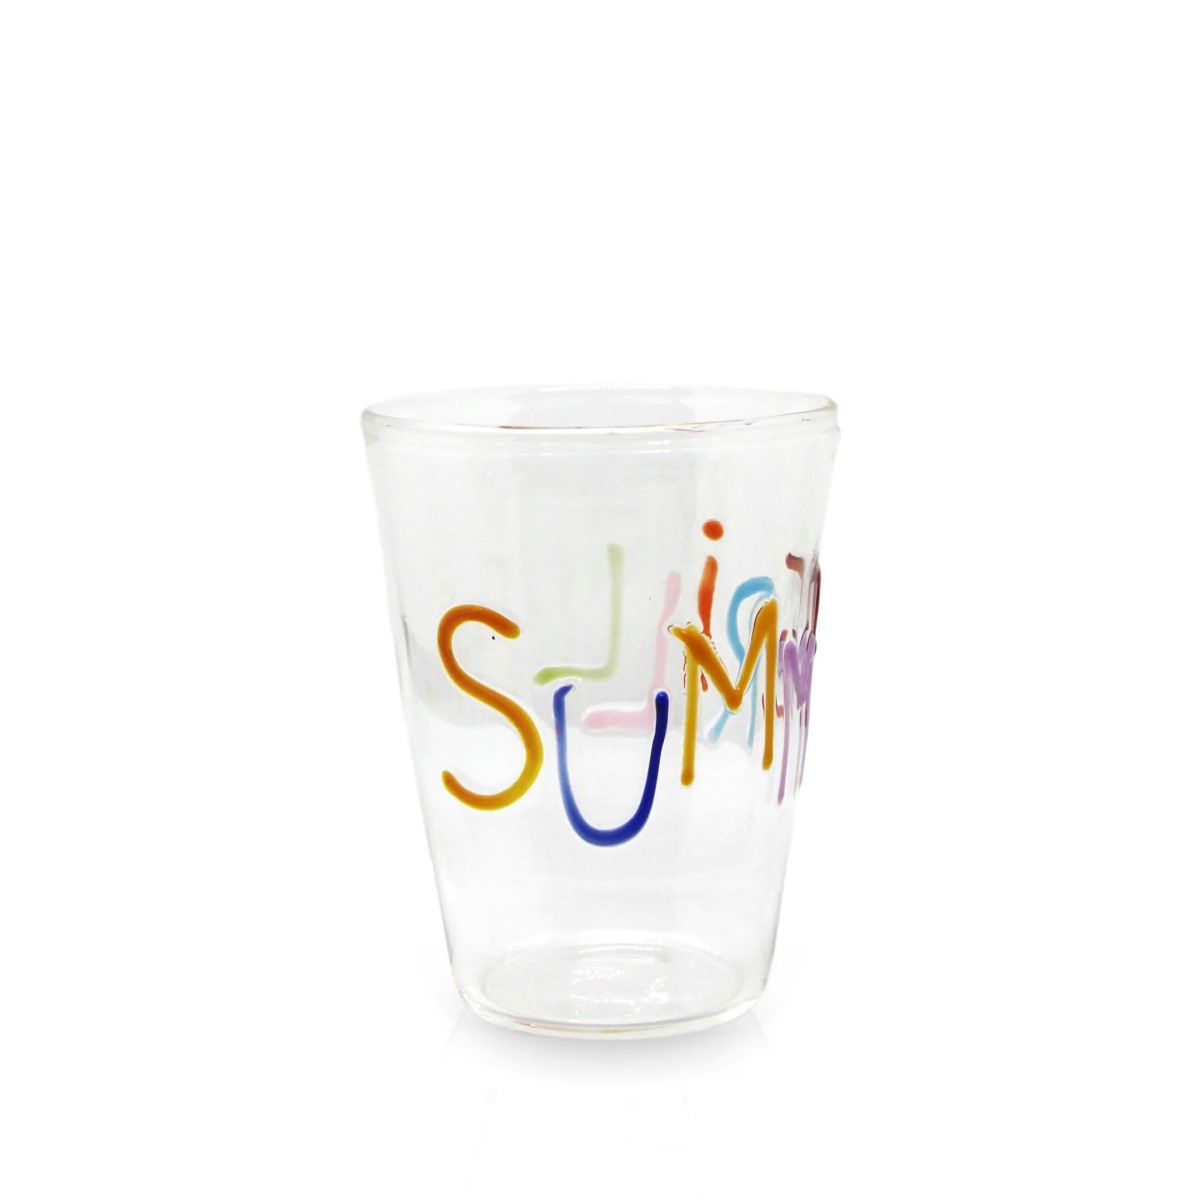 How Is A Glass Cup Made